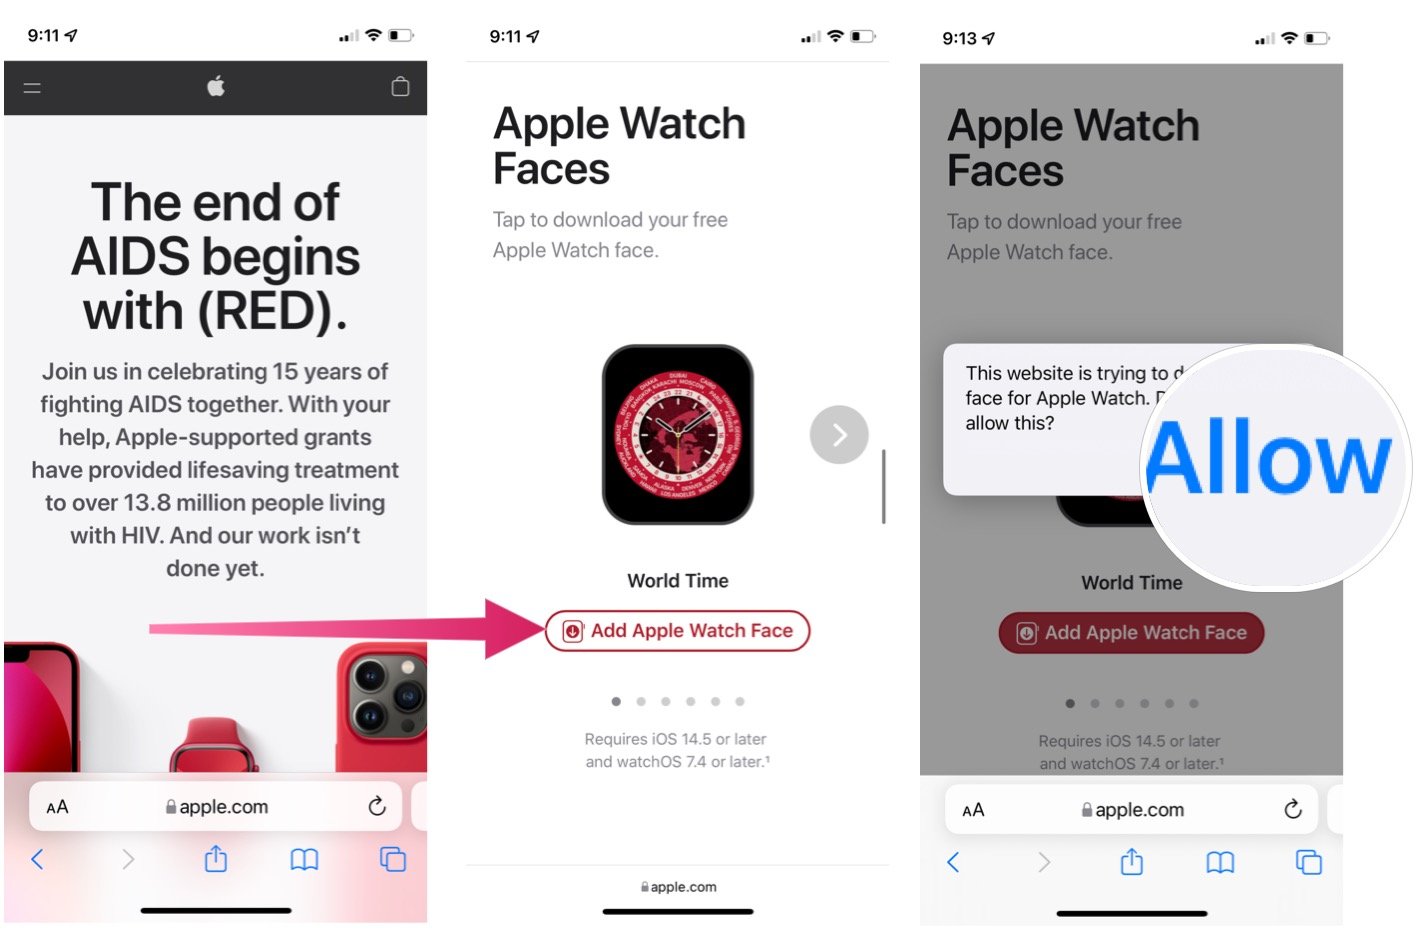 To add a special (PRODUCT)RED Apple Watch face, go to the special webpage from your iPhone. Scroll down to the Apple Watch Faces section. Tap Add Apple Watch Face for the face you wish to download and install. Choose Allow on the pop-up menu to confirm your selection.